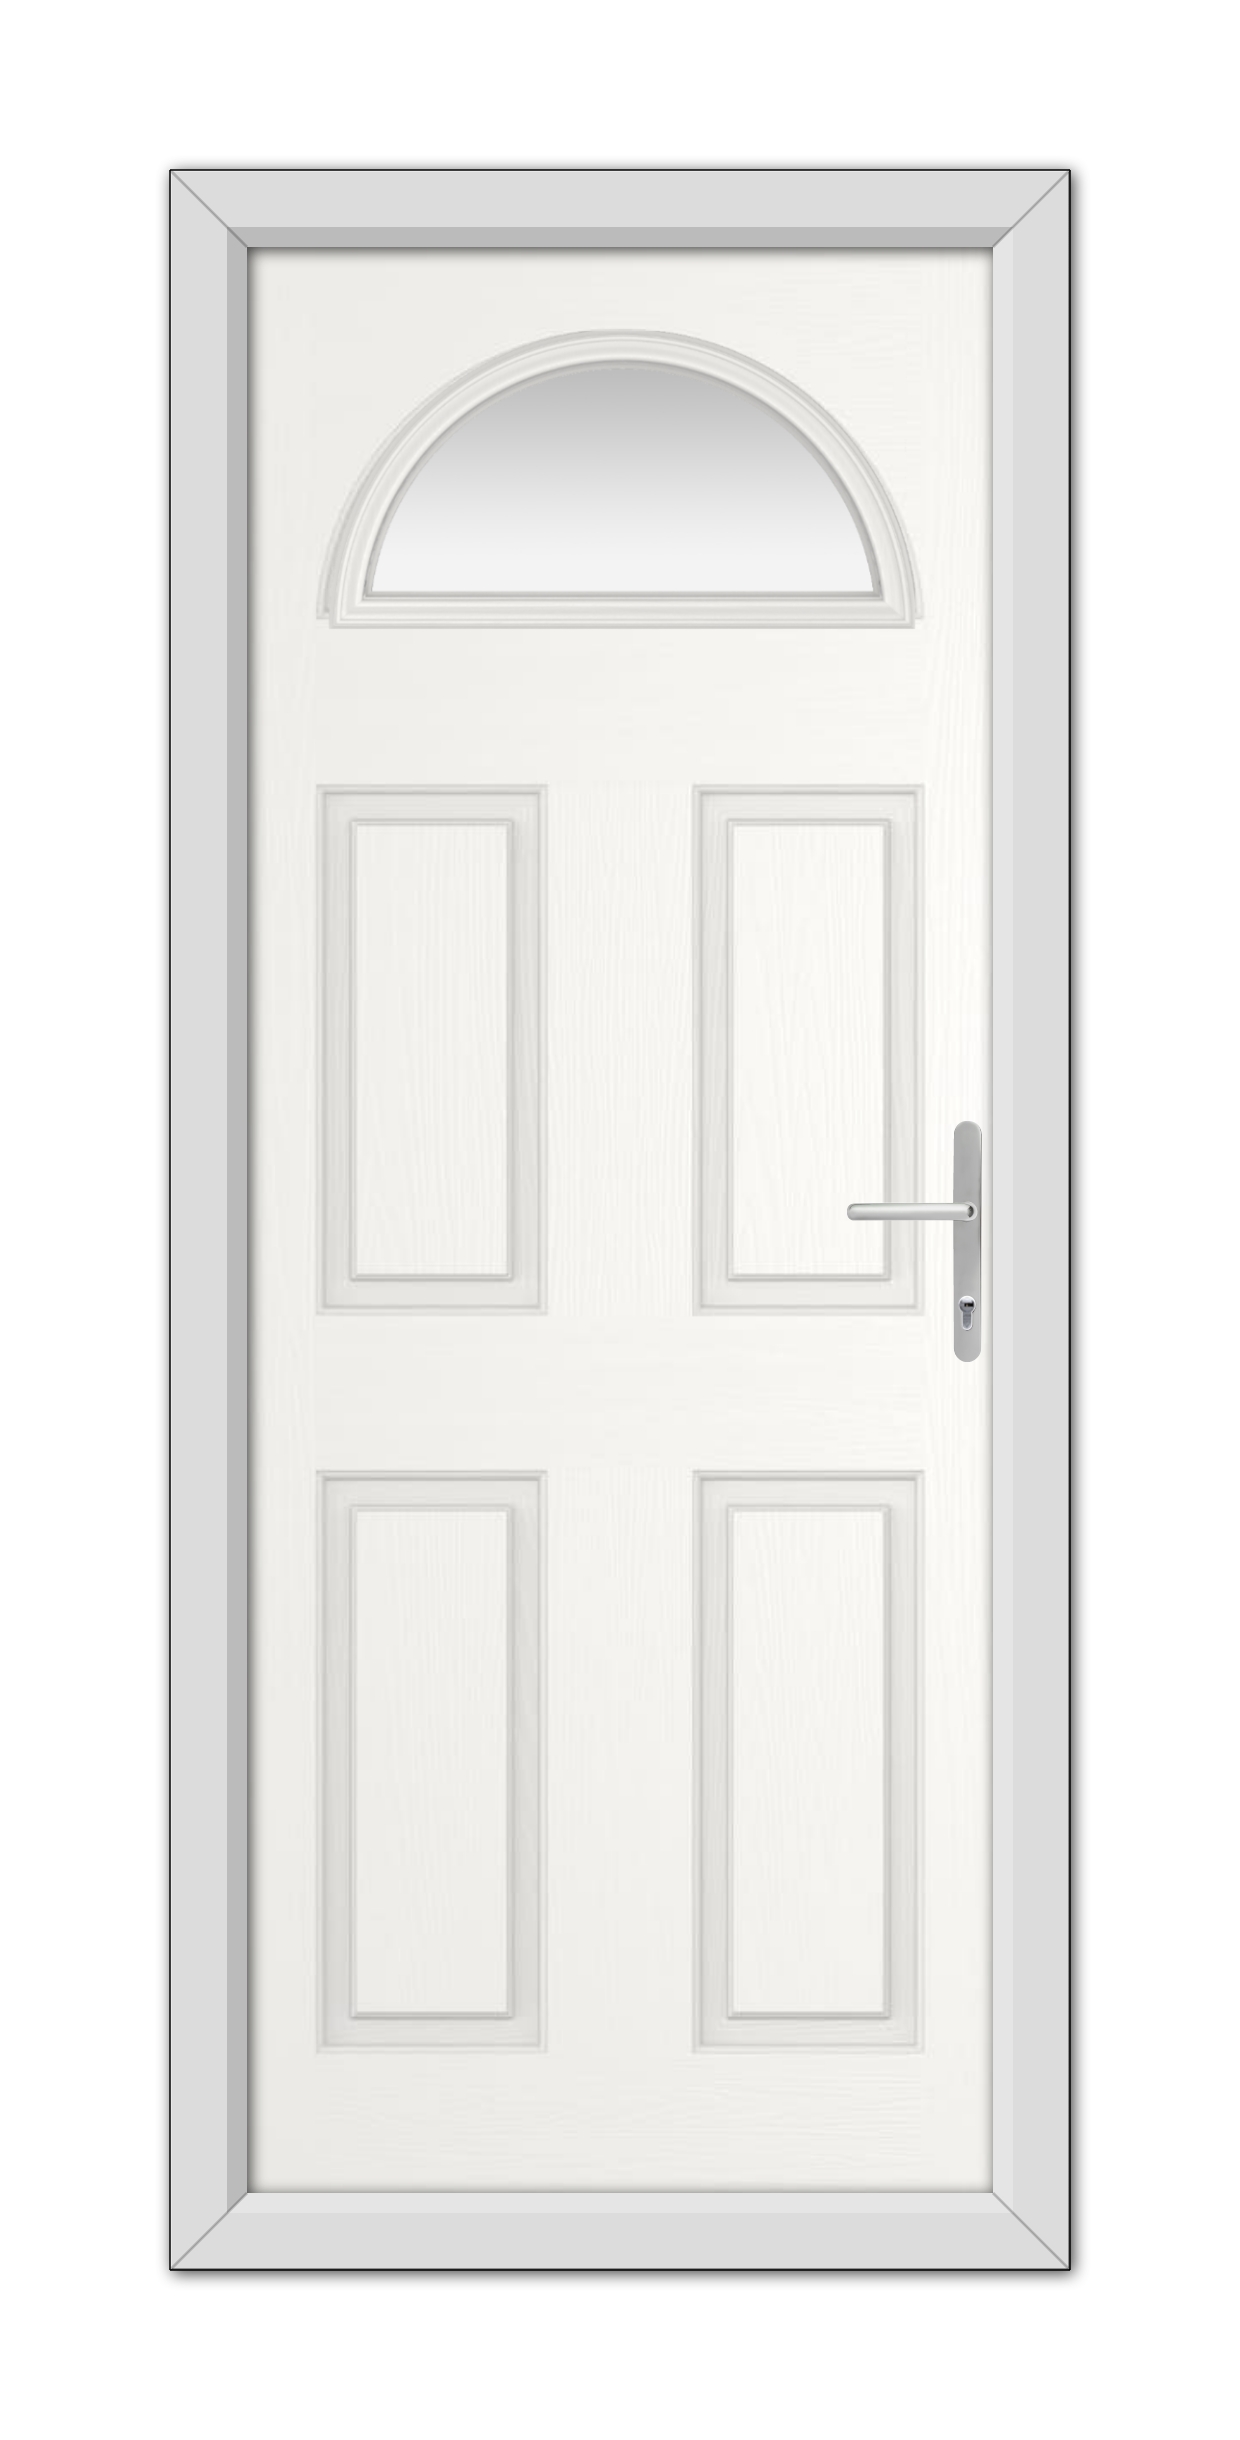 White Seville Solid uPVC door with six panels and an arched window, featuring a stainless steel handle, isolated on a white background.